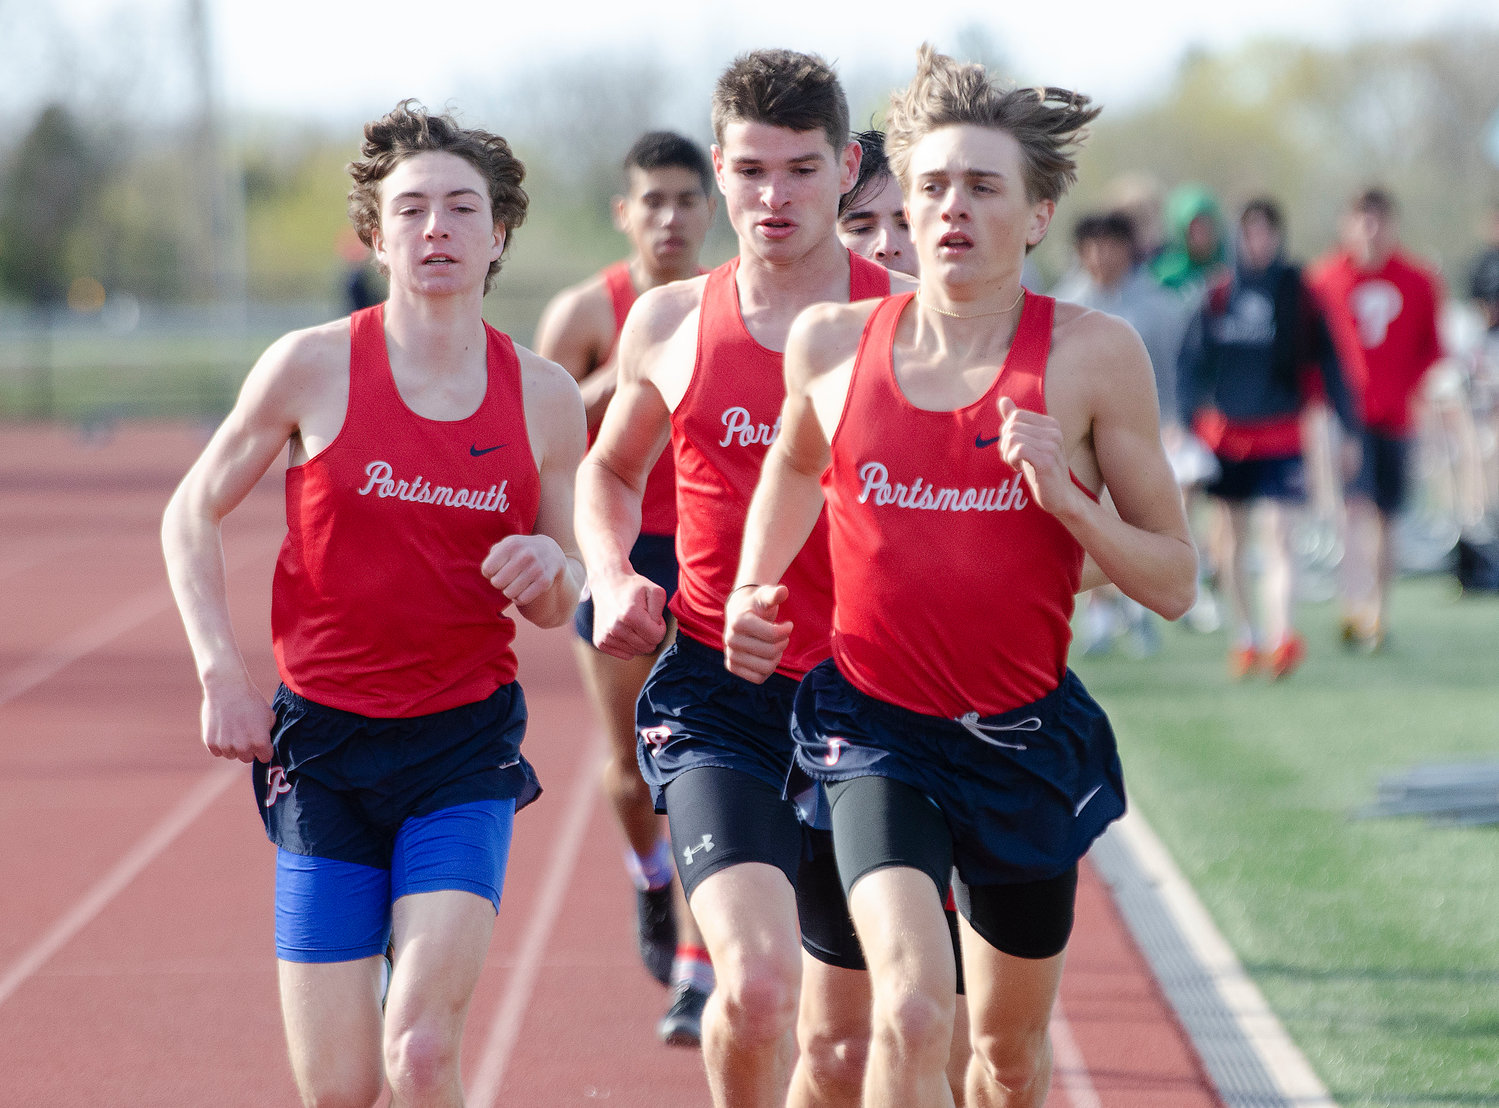 Portsmouth High’s Chris Vachon, Kevin Sullivan and Kaden Kluth (from left) run in a pack during the 1,500 meter run at Monday’s home track meet. Kluth would go on to win the event, and also set a new school record in winning the 3,000-meter run.